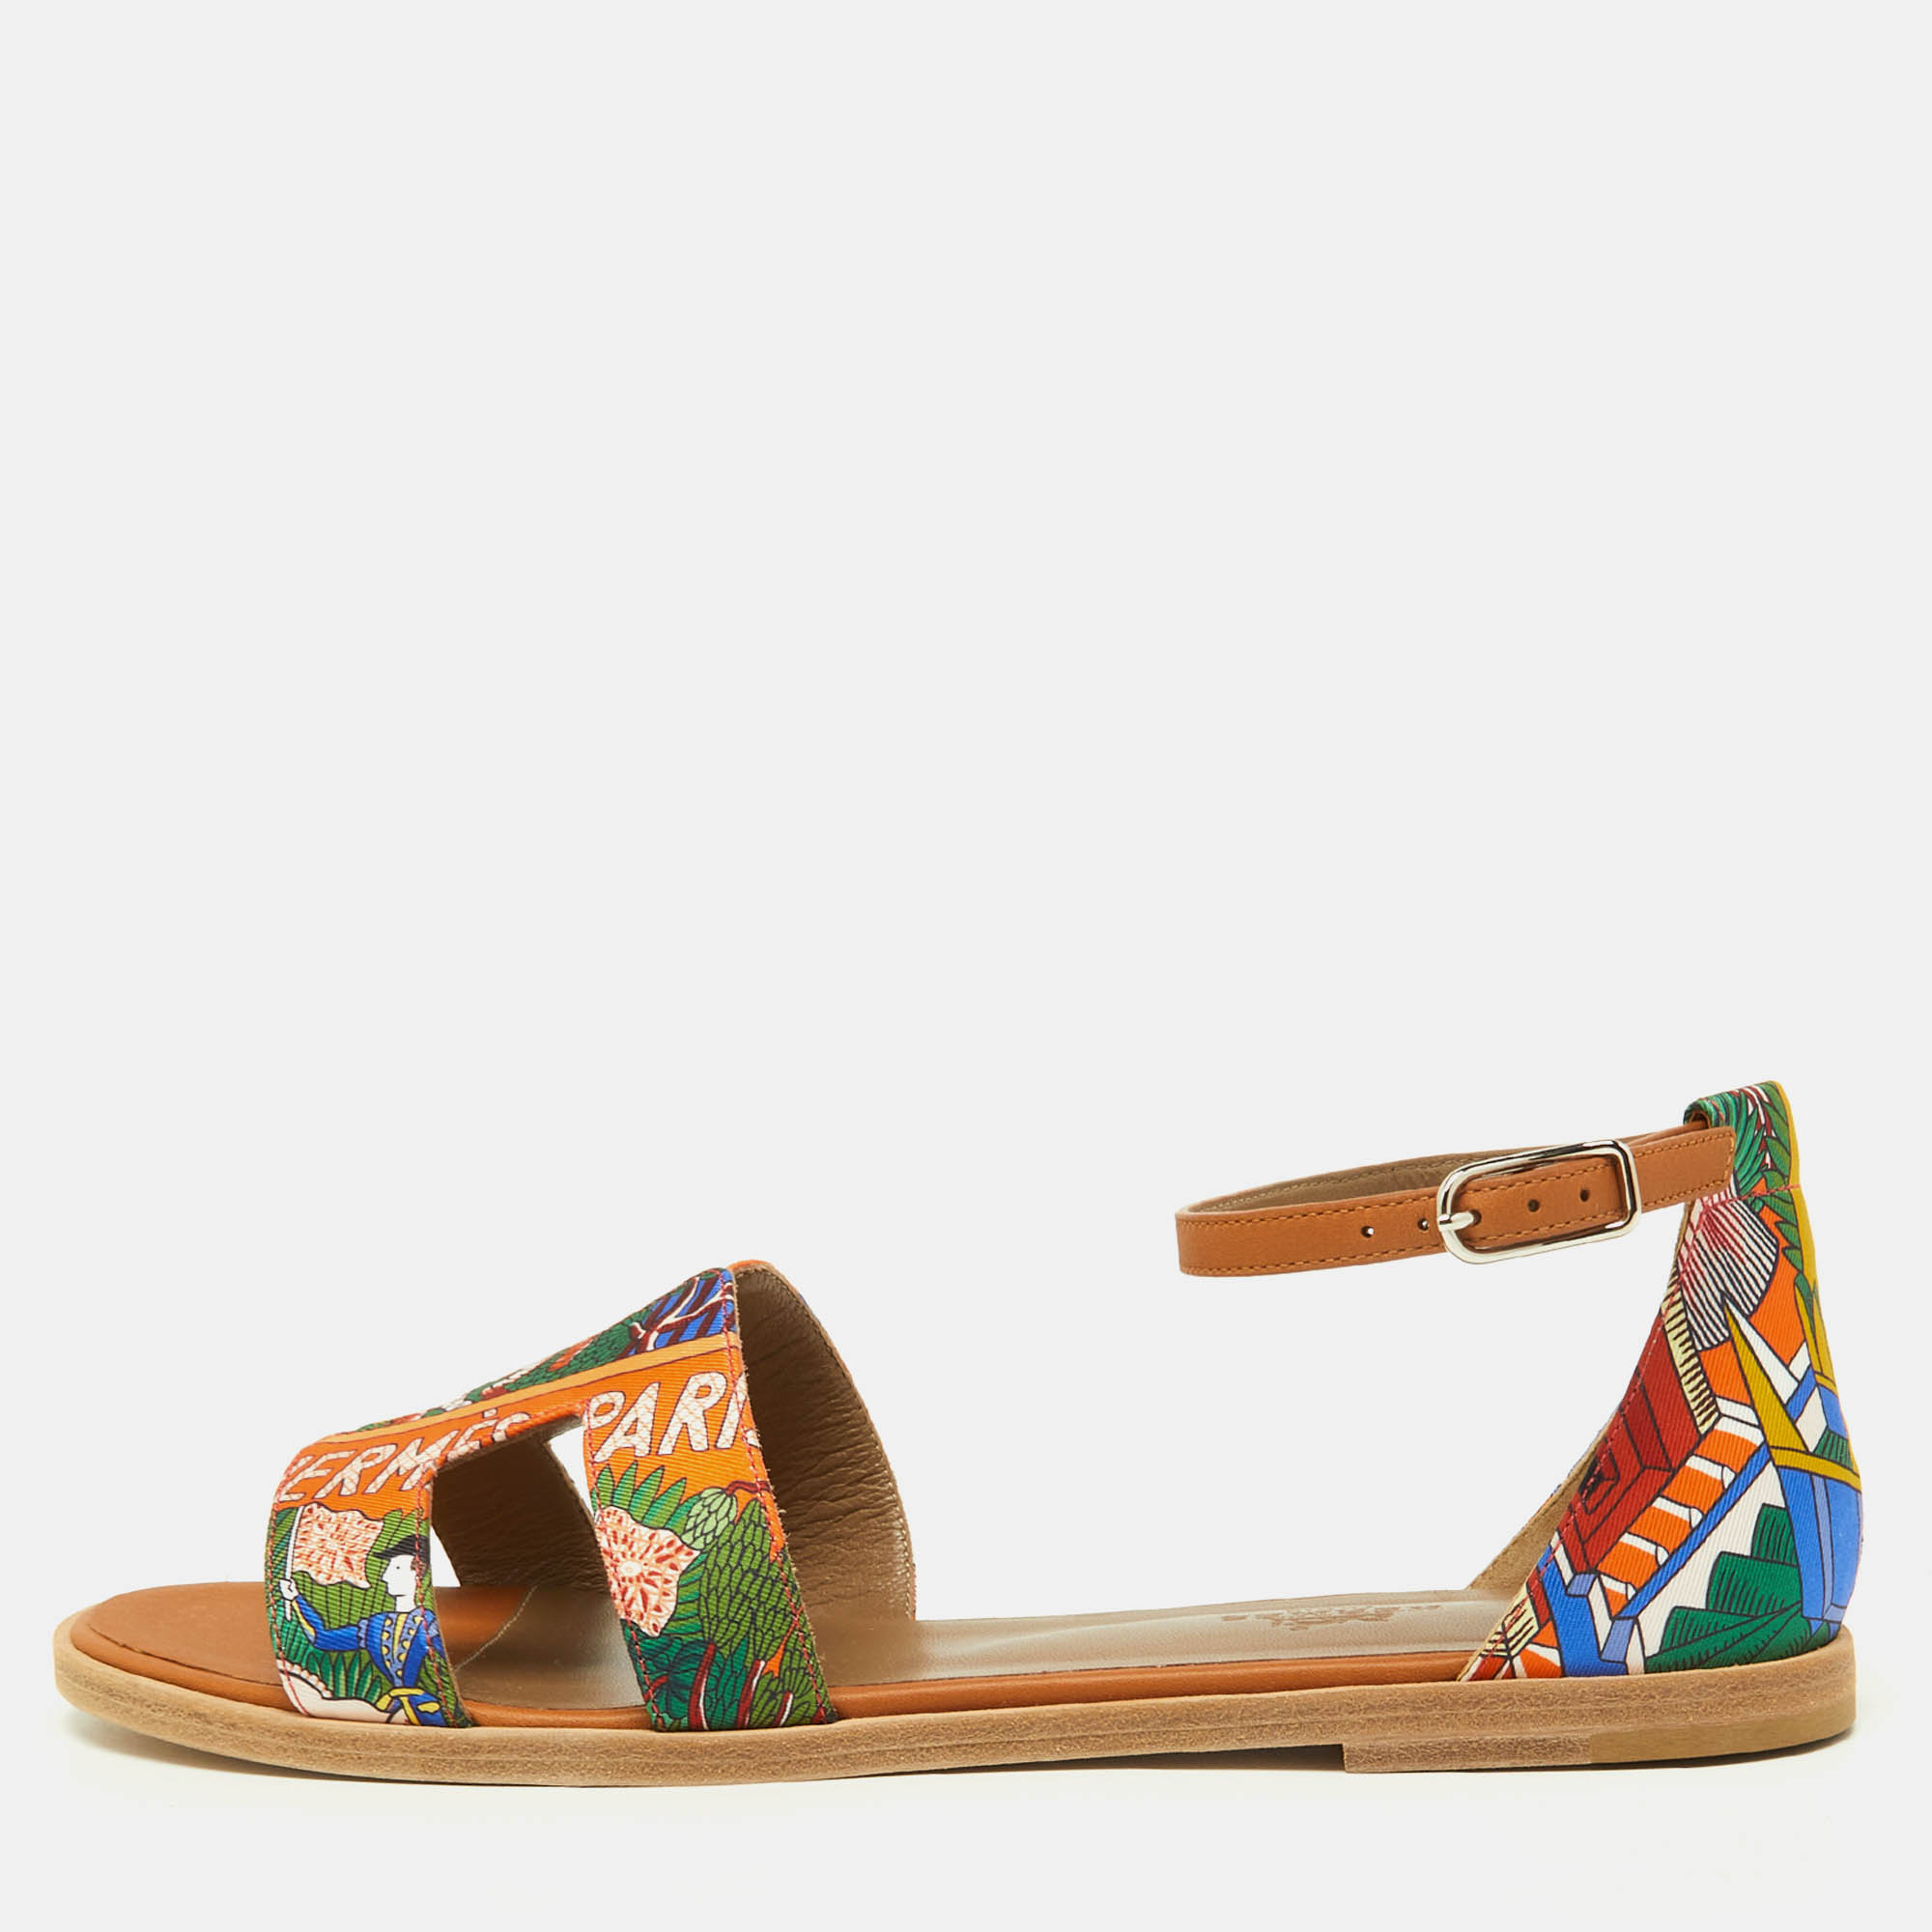 Hermes multicolor silk and leather santorini ankle strap sandals size 37